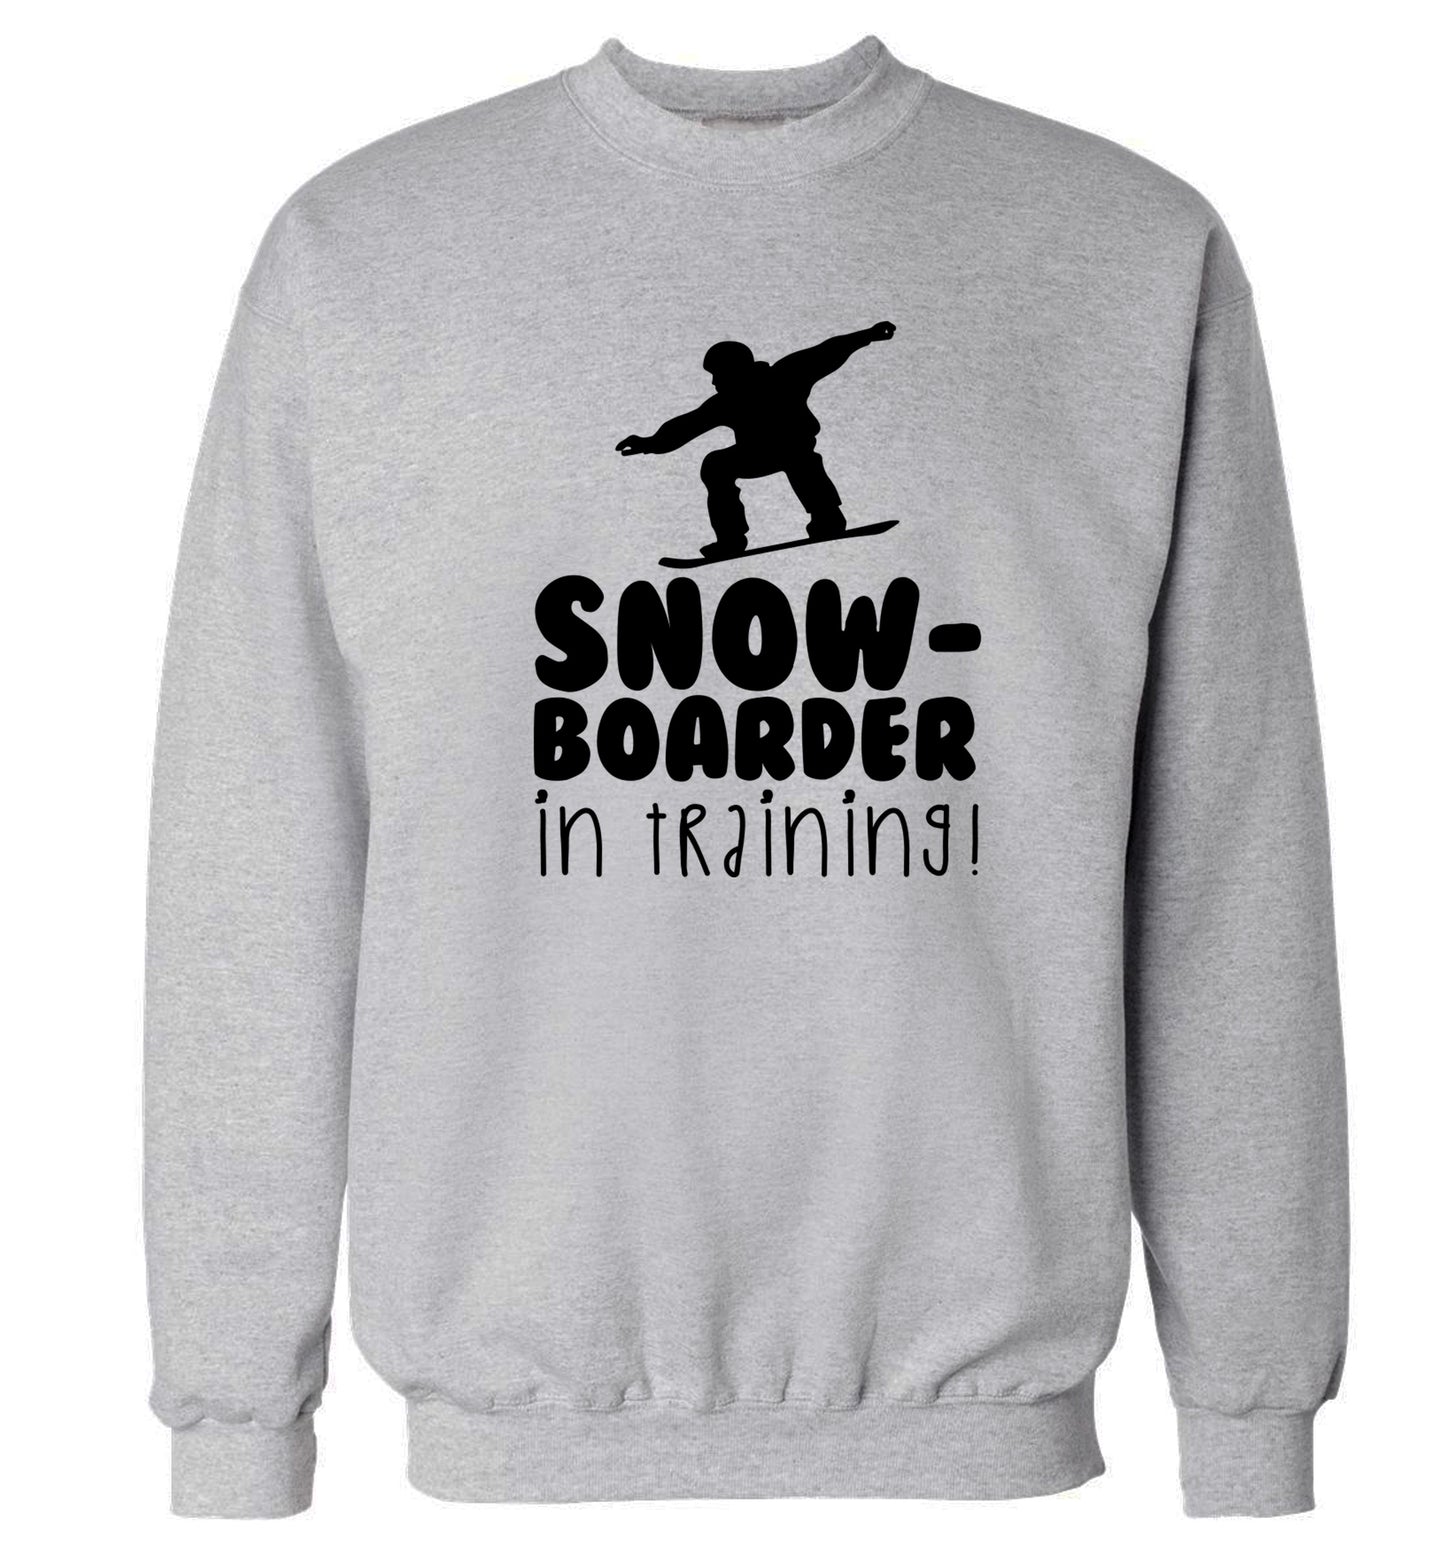 Snowboarder in training Adult's unisex grey Sweater 2XL